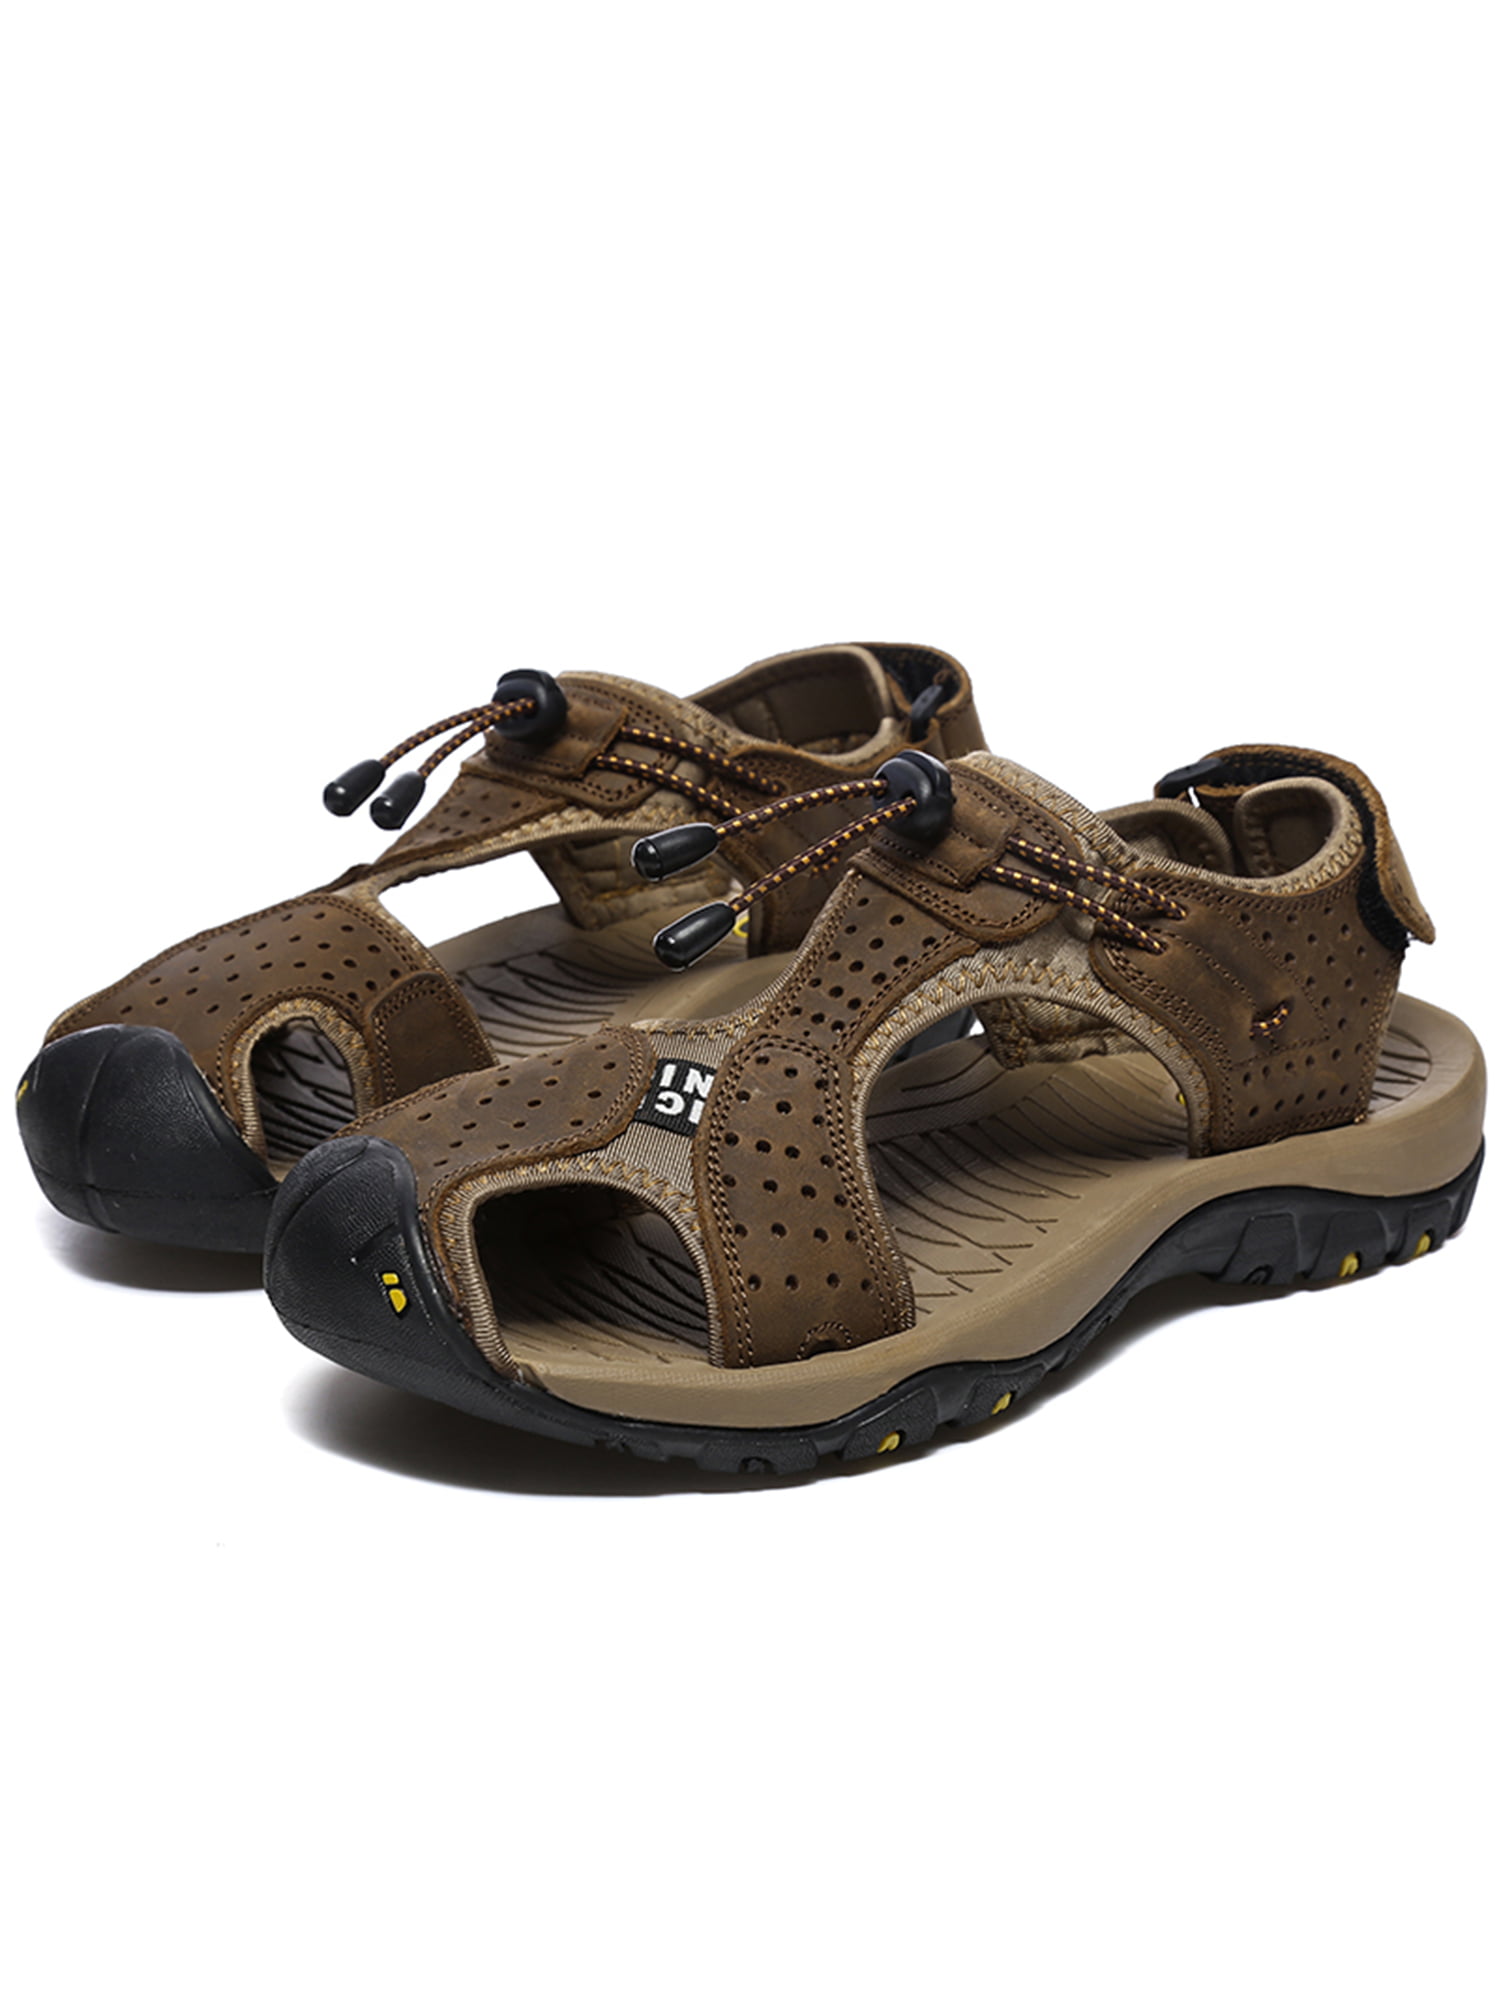 Mens Closed Toe Hiking Sandals Leather 